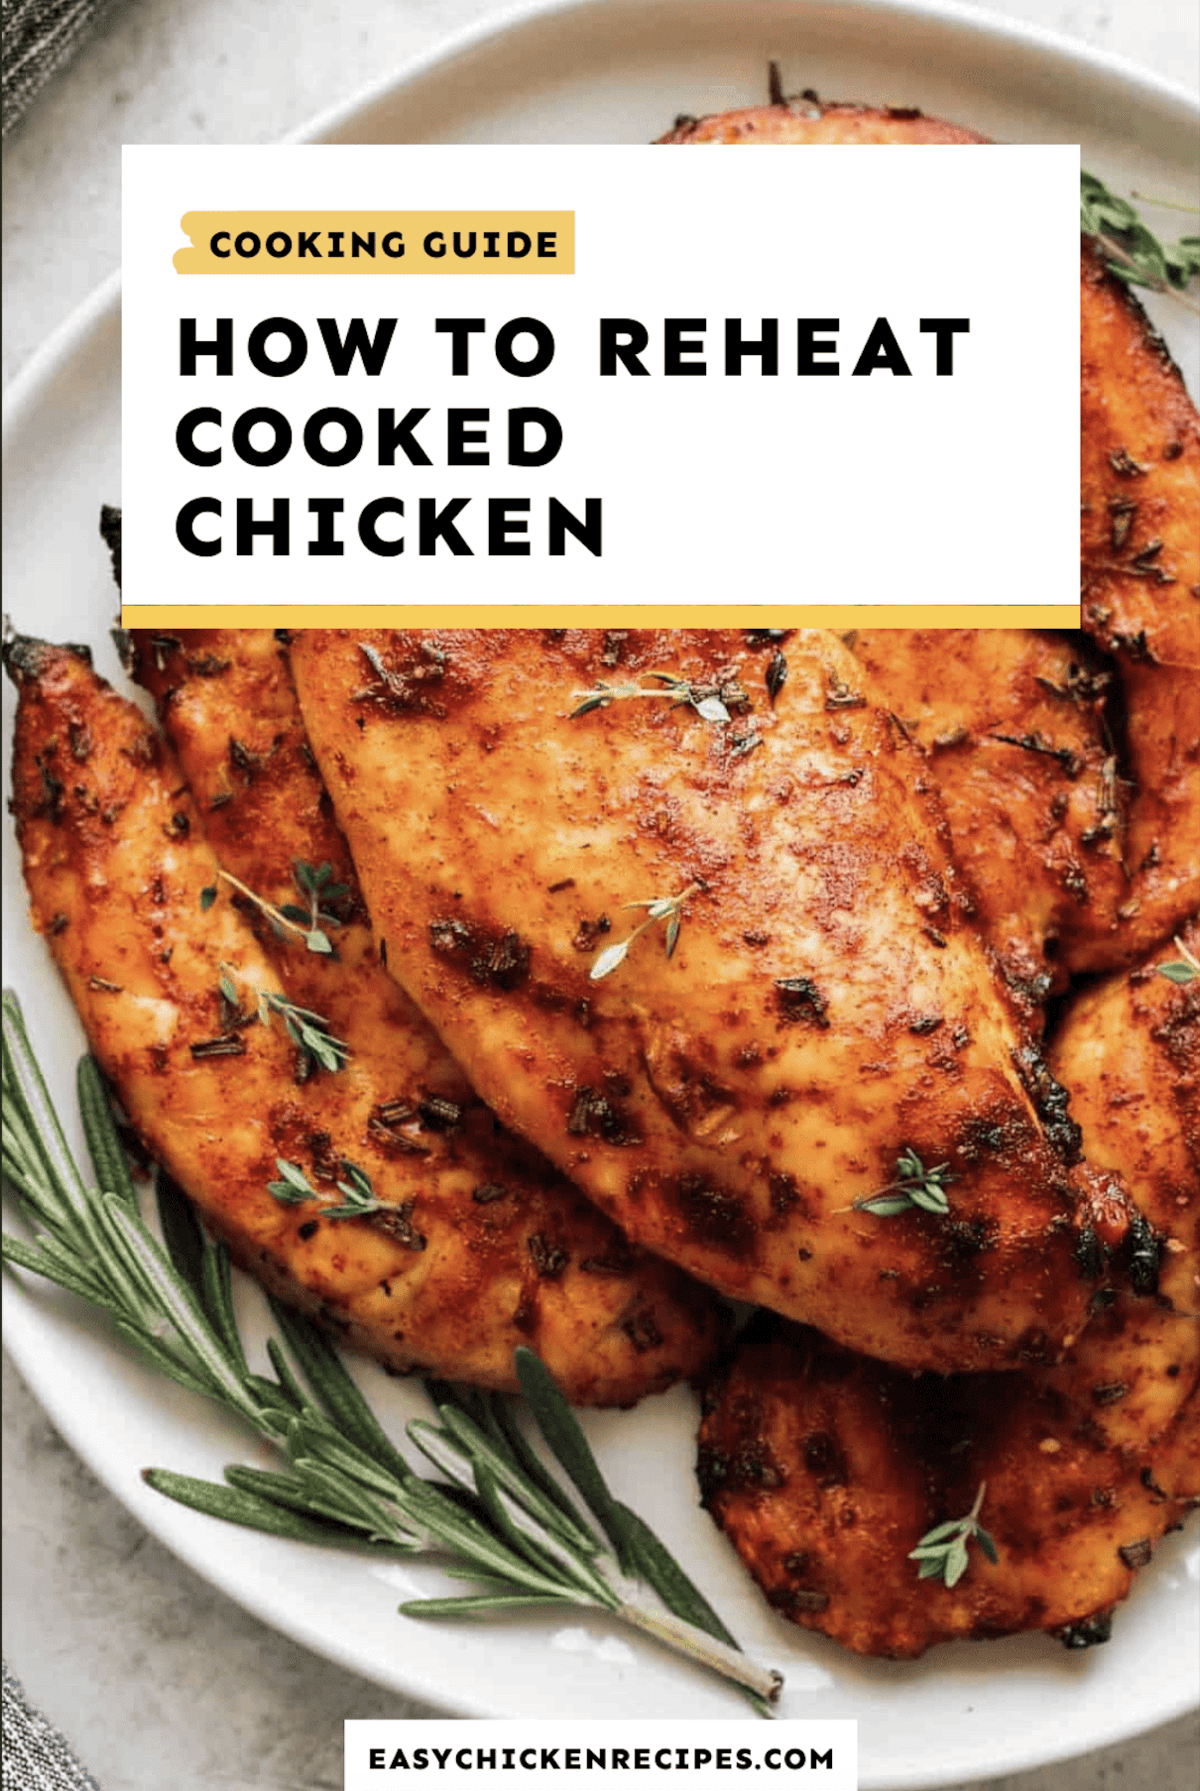 How to Reheat Chicken (without drying it out) - Easy Chicken Recipes